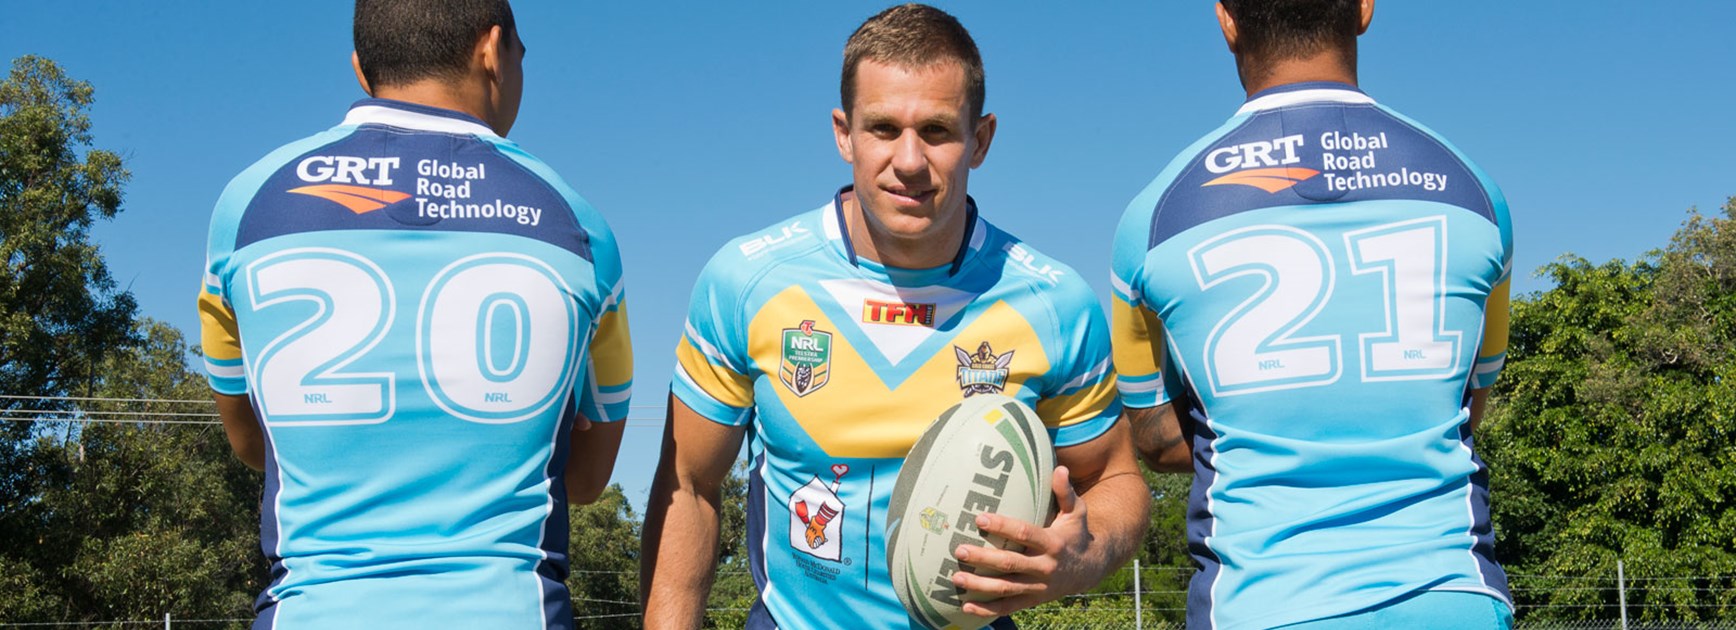 Titans vice-captain William Zillman shows off the new sponsor logos on the first grade kit.